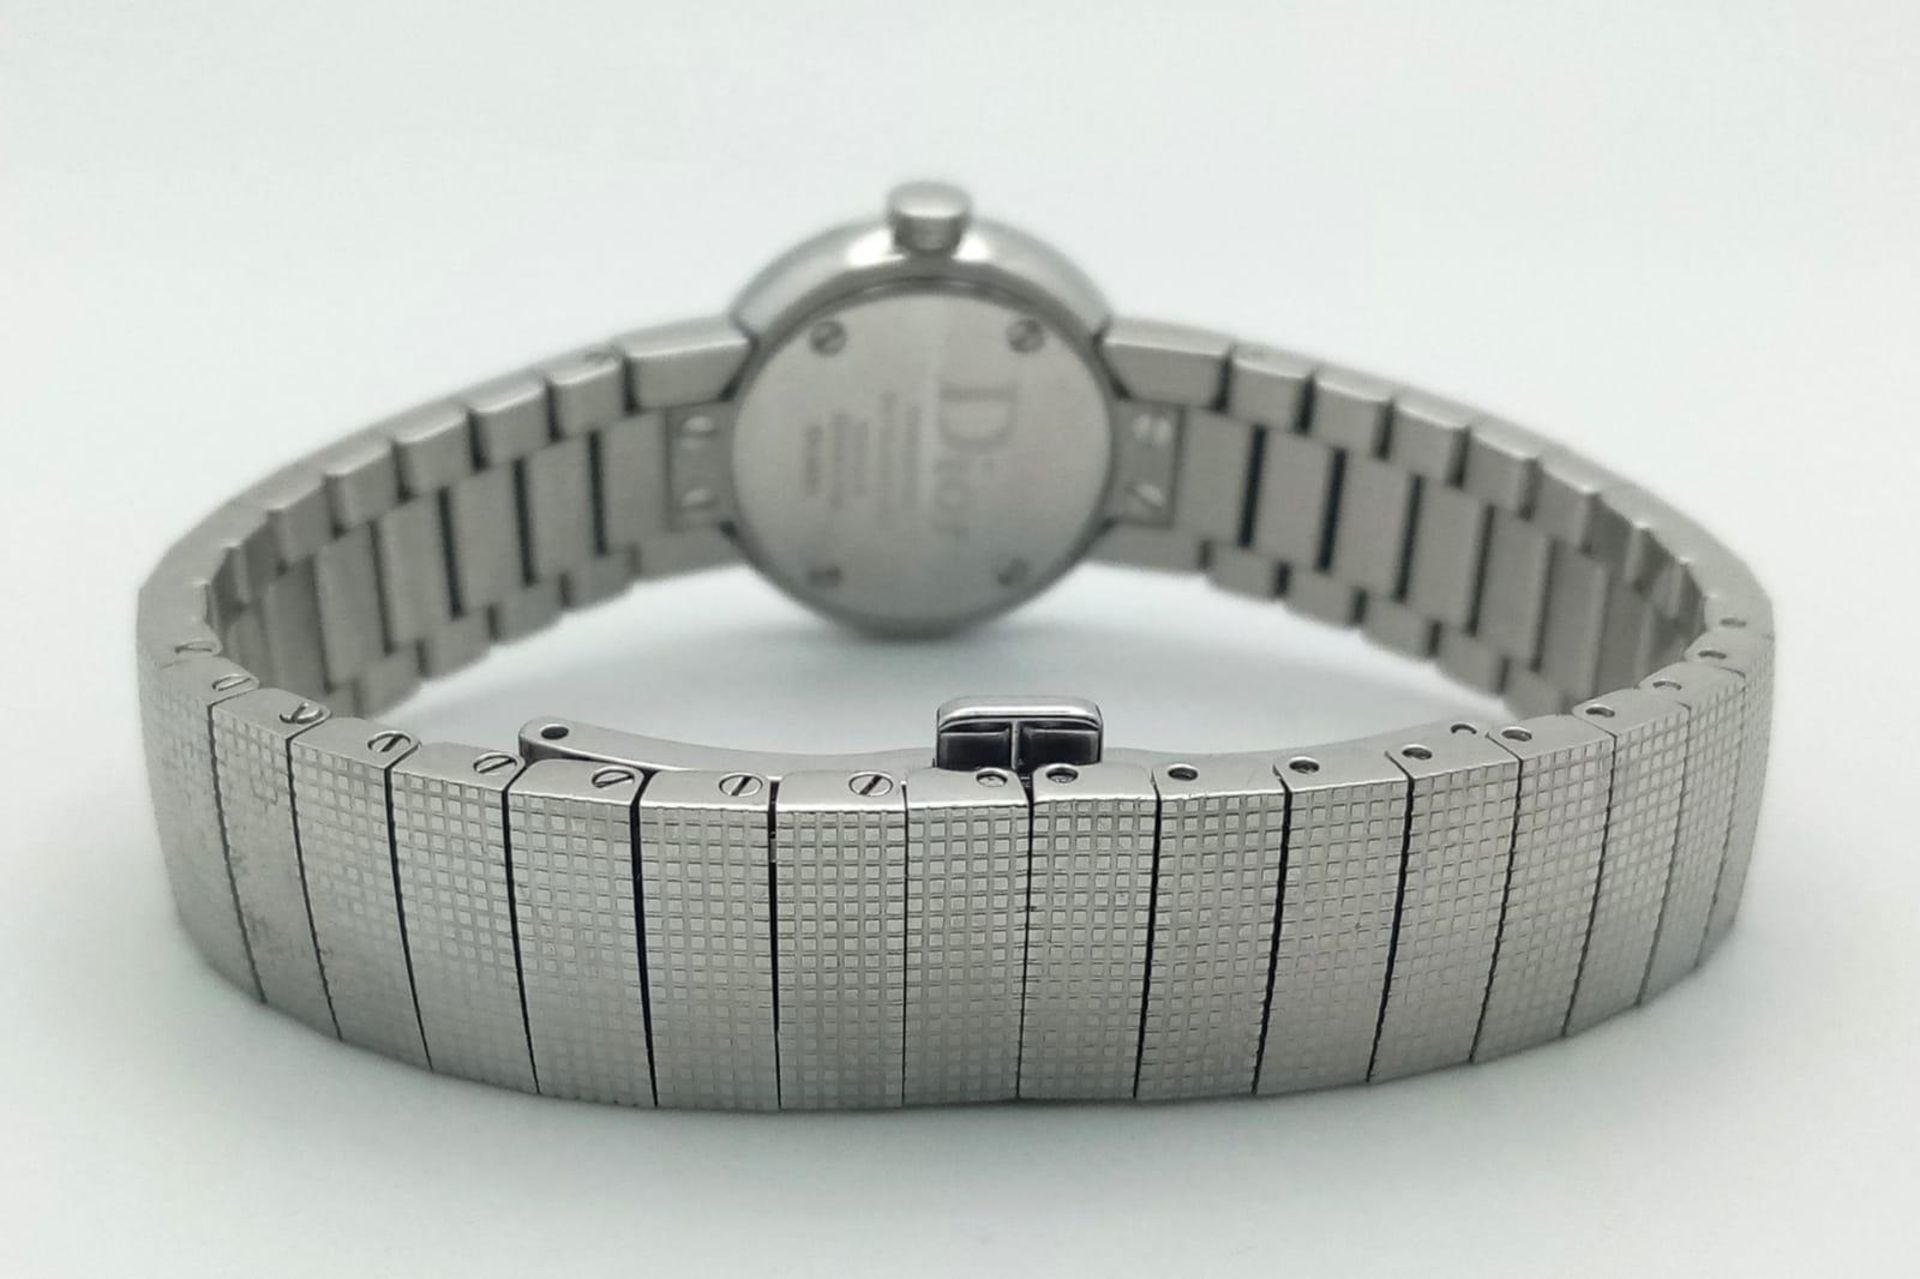 A Designer Christian Dior Quartz Ladies Watch. Stainless steel bracelet and case - 23mm. White dial. - Image 9 of 10